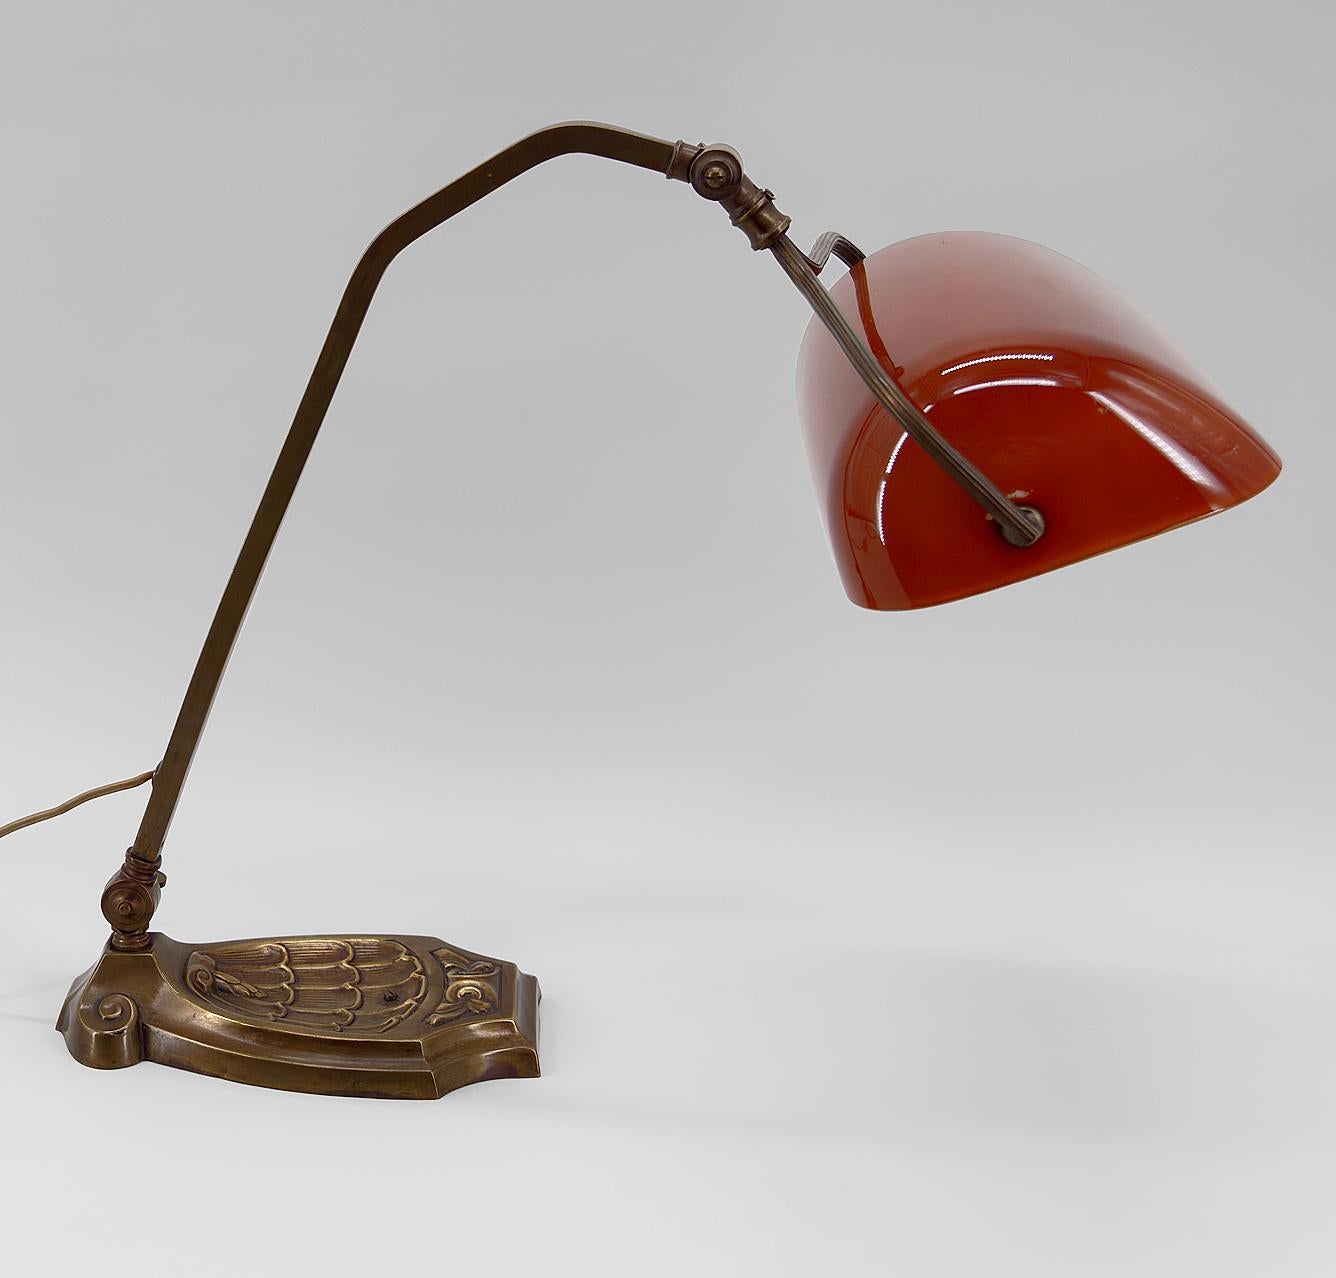 Superb banker's lamp / Emeralite with red / orange opaline glass shade and brass structure composed of a base and an articulated arm.

Art Nouveau, France, around 1900.

In very good condition, new opaline, electricity